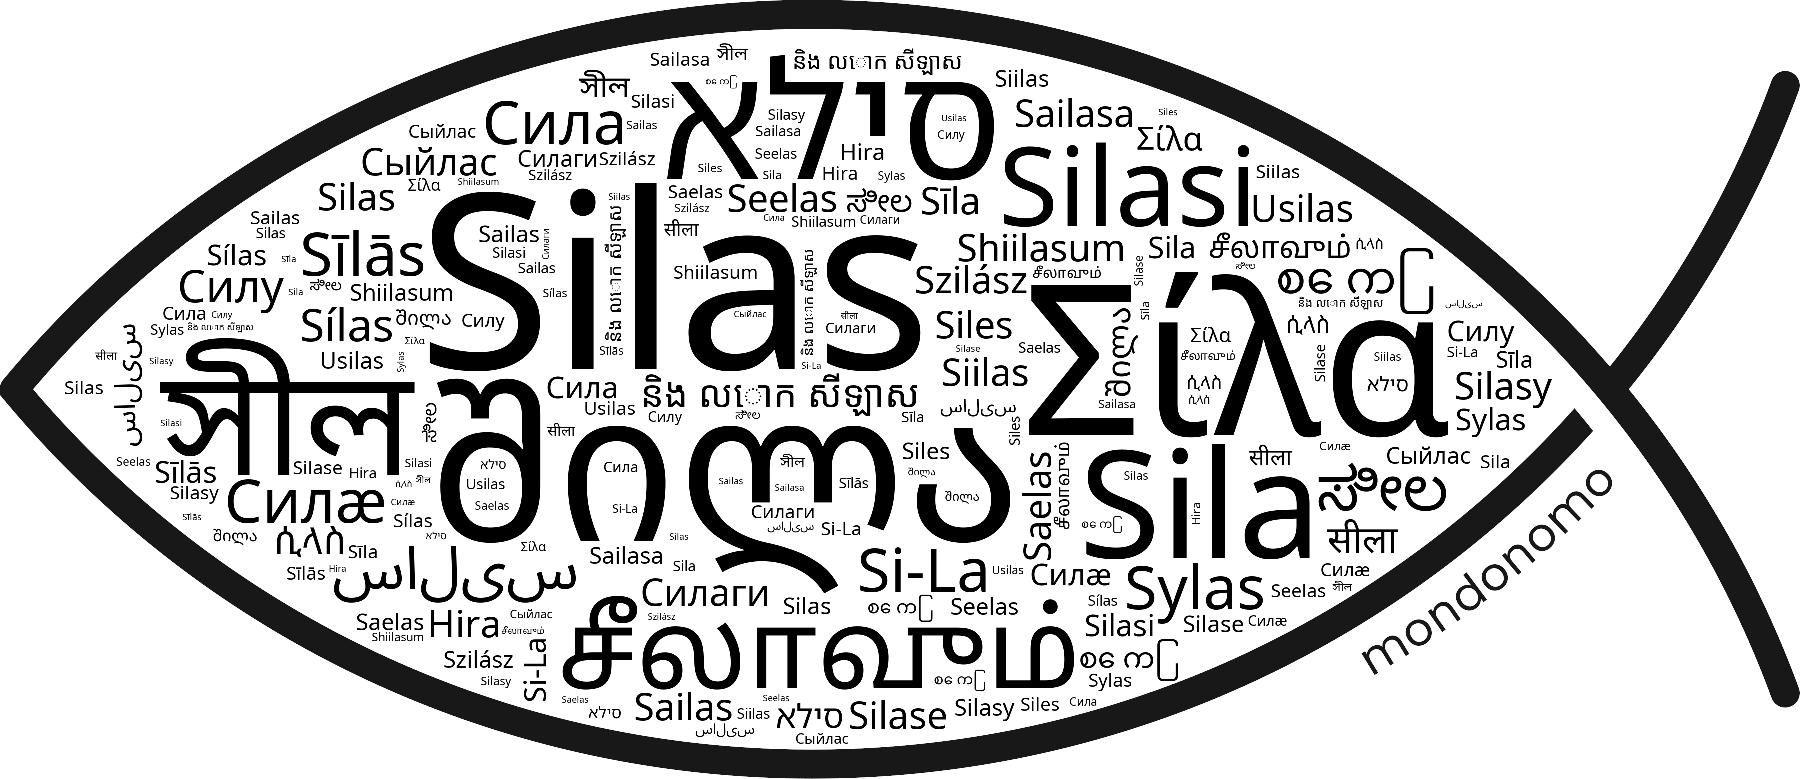 Name Silas in the world's Bibles